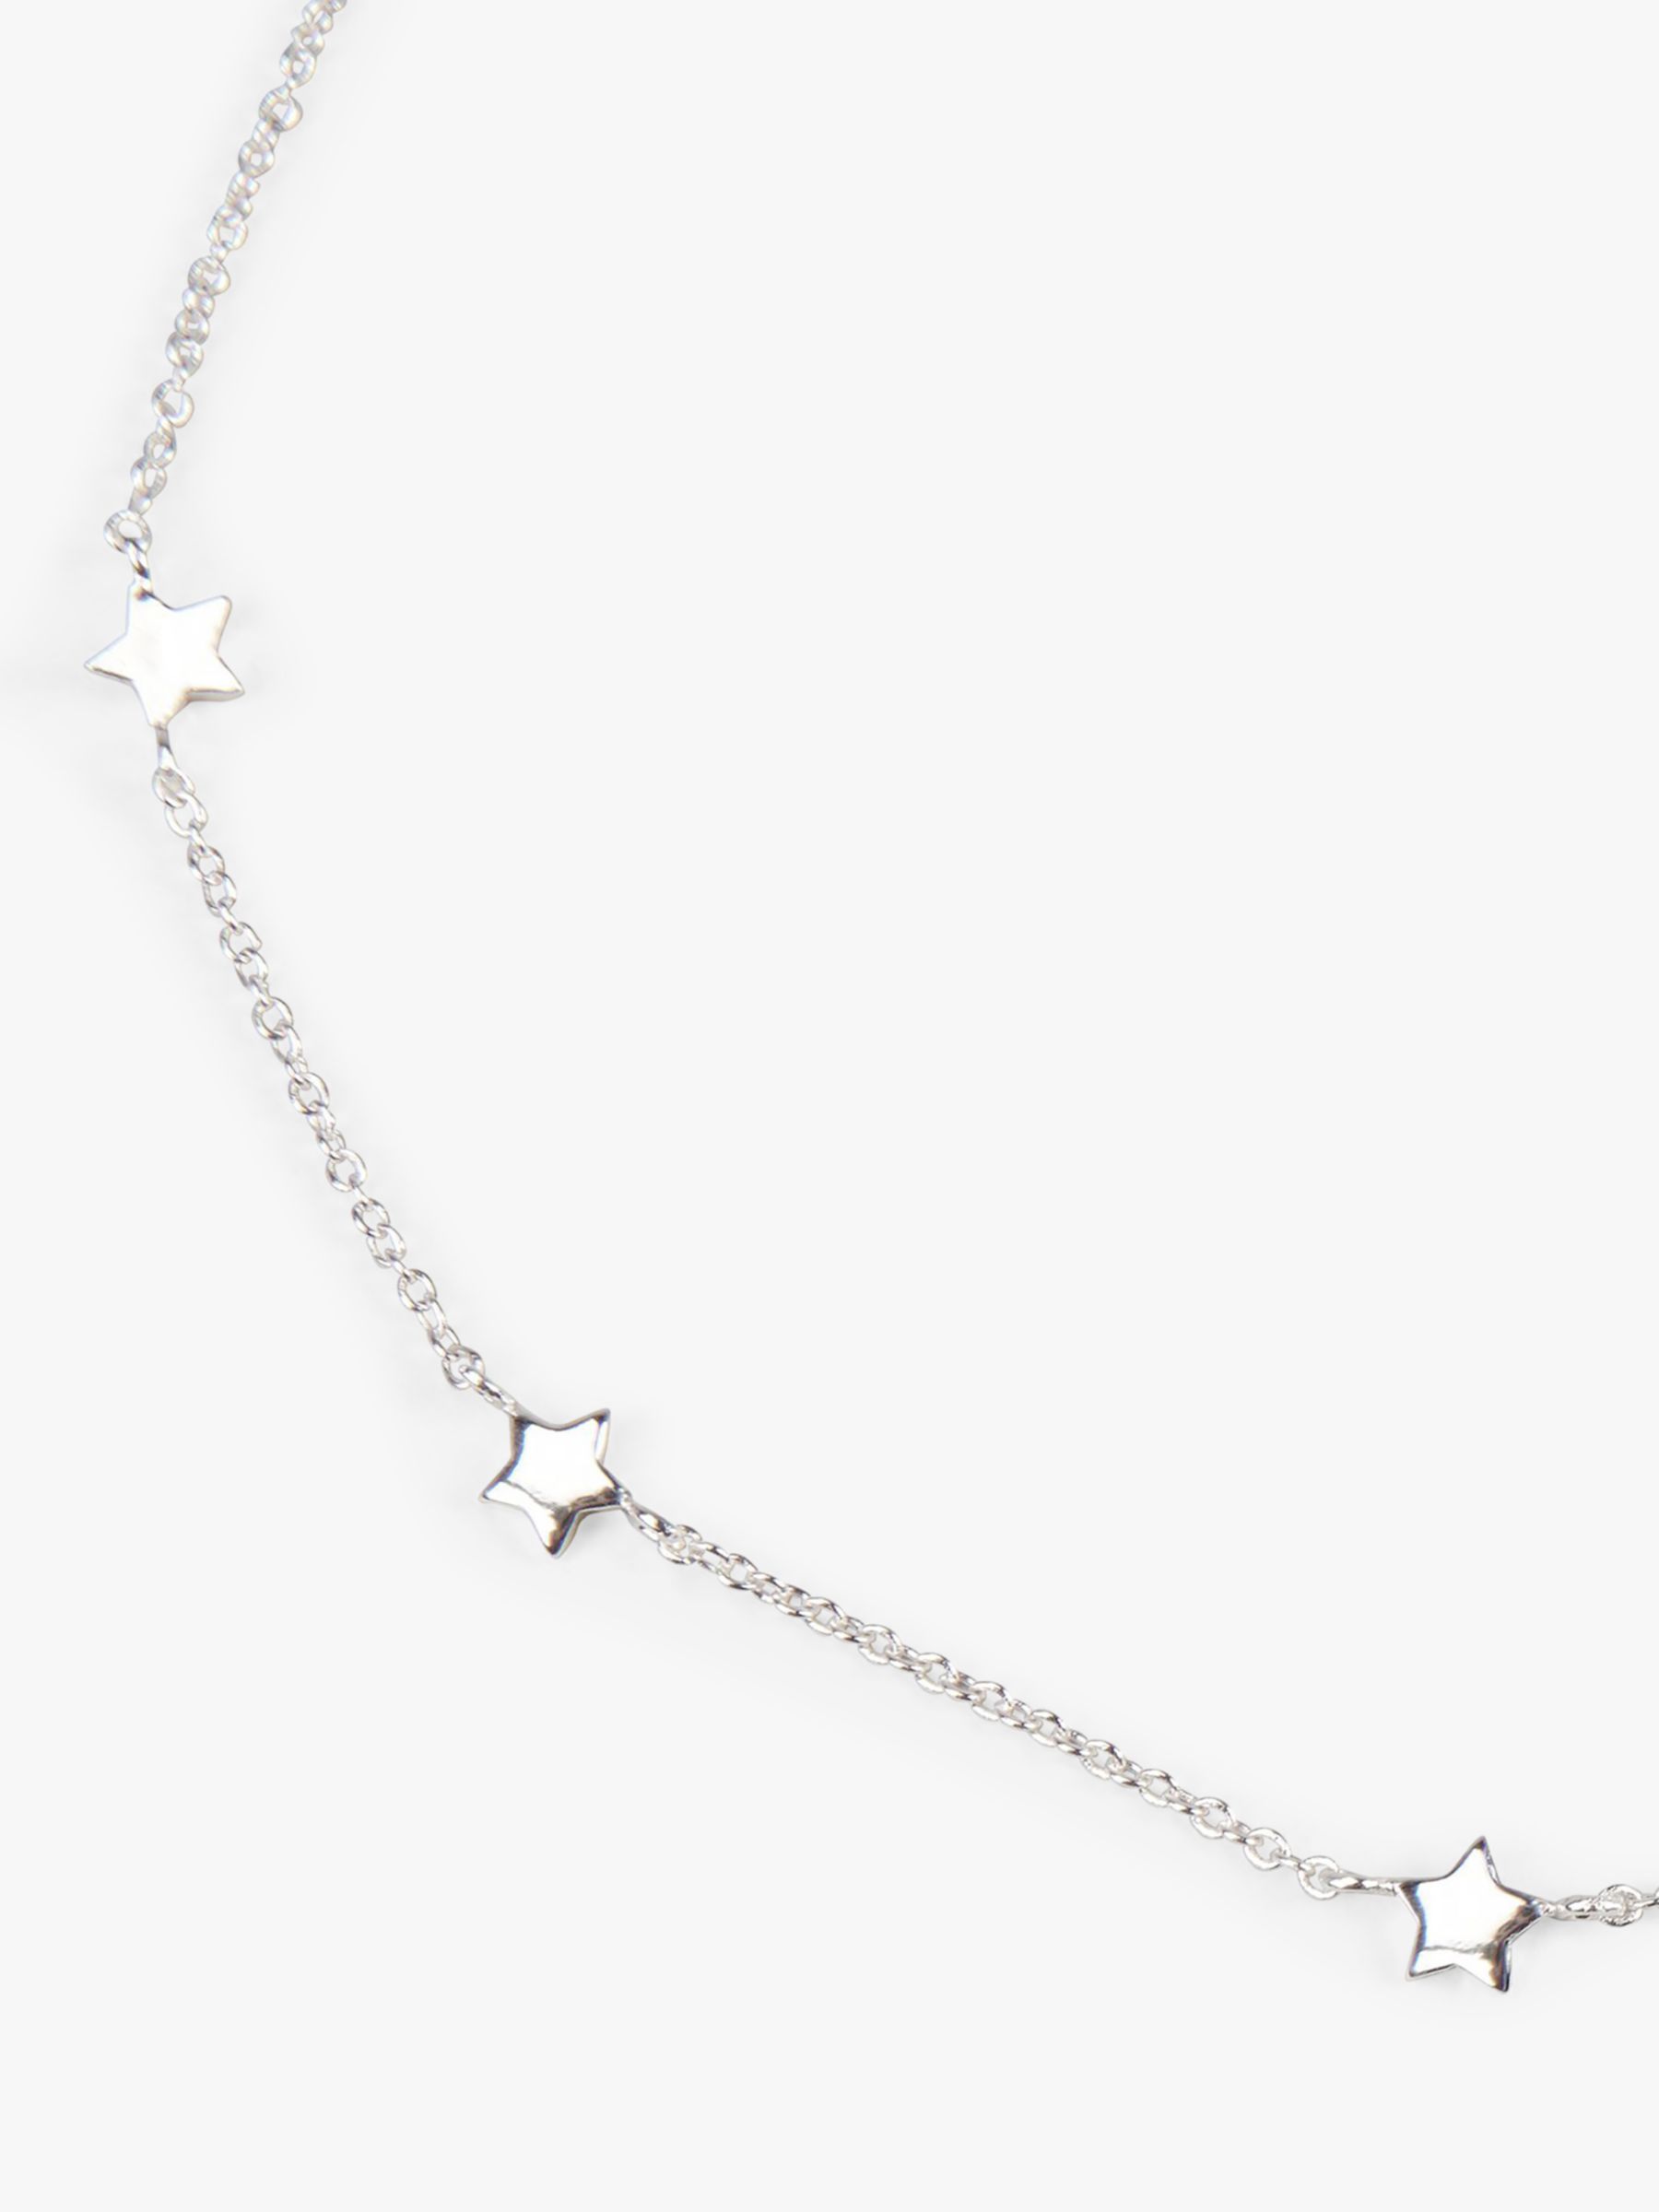 HUSH Multi Star Choker Necklace, Silver, Silver at John Lewis & Partners